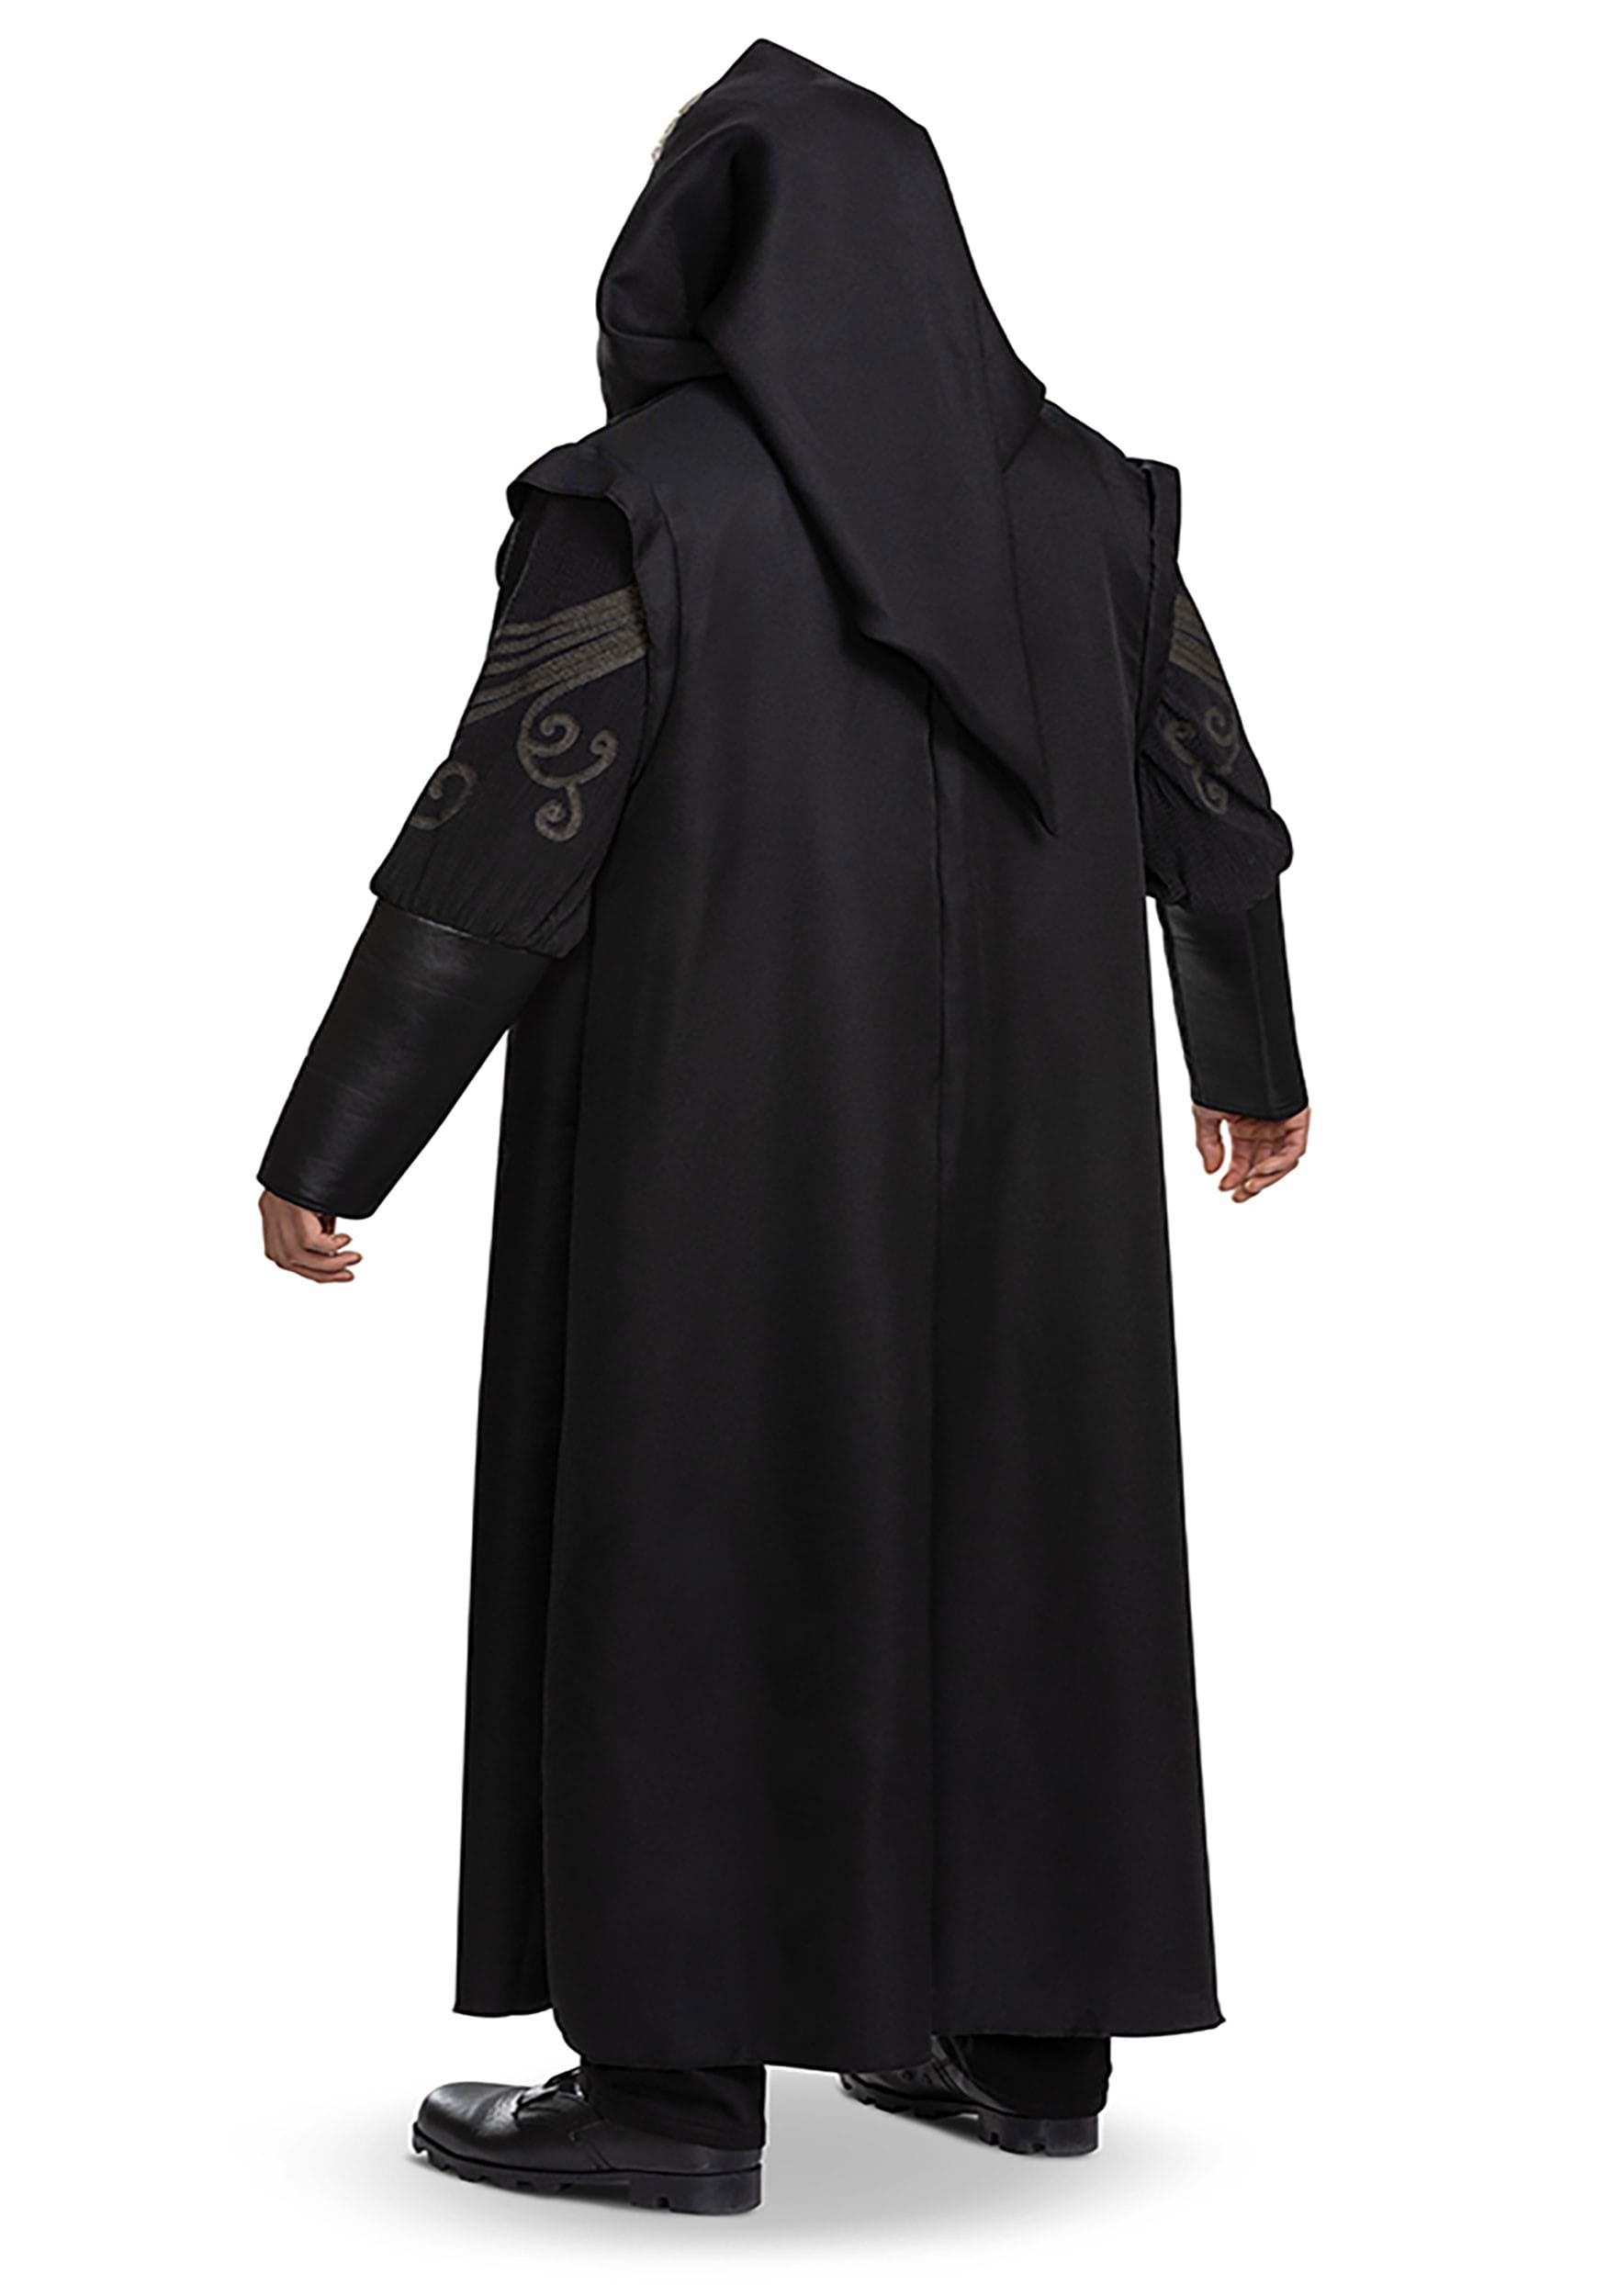 Harry Potter Deluxe Death Eater Costume For Adults